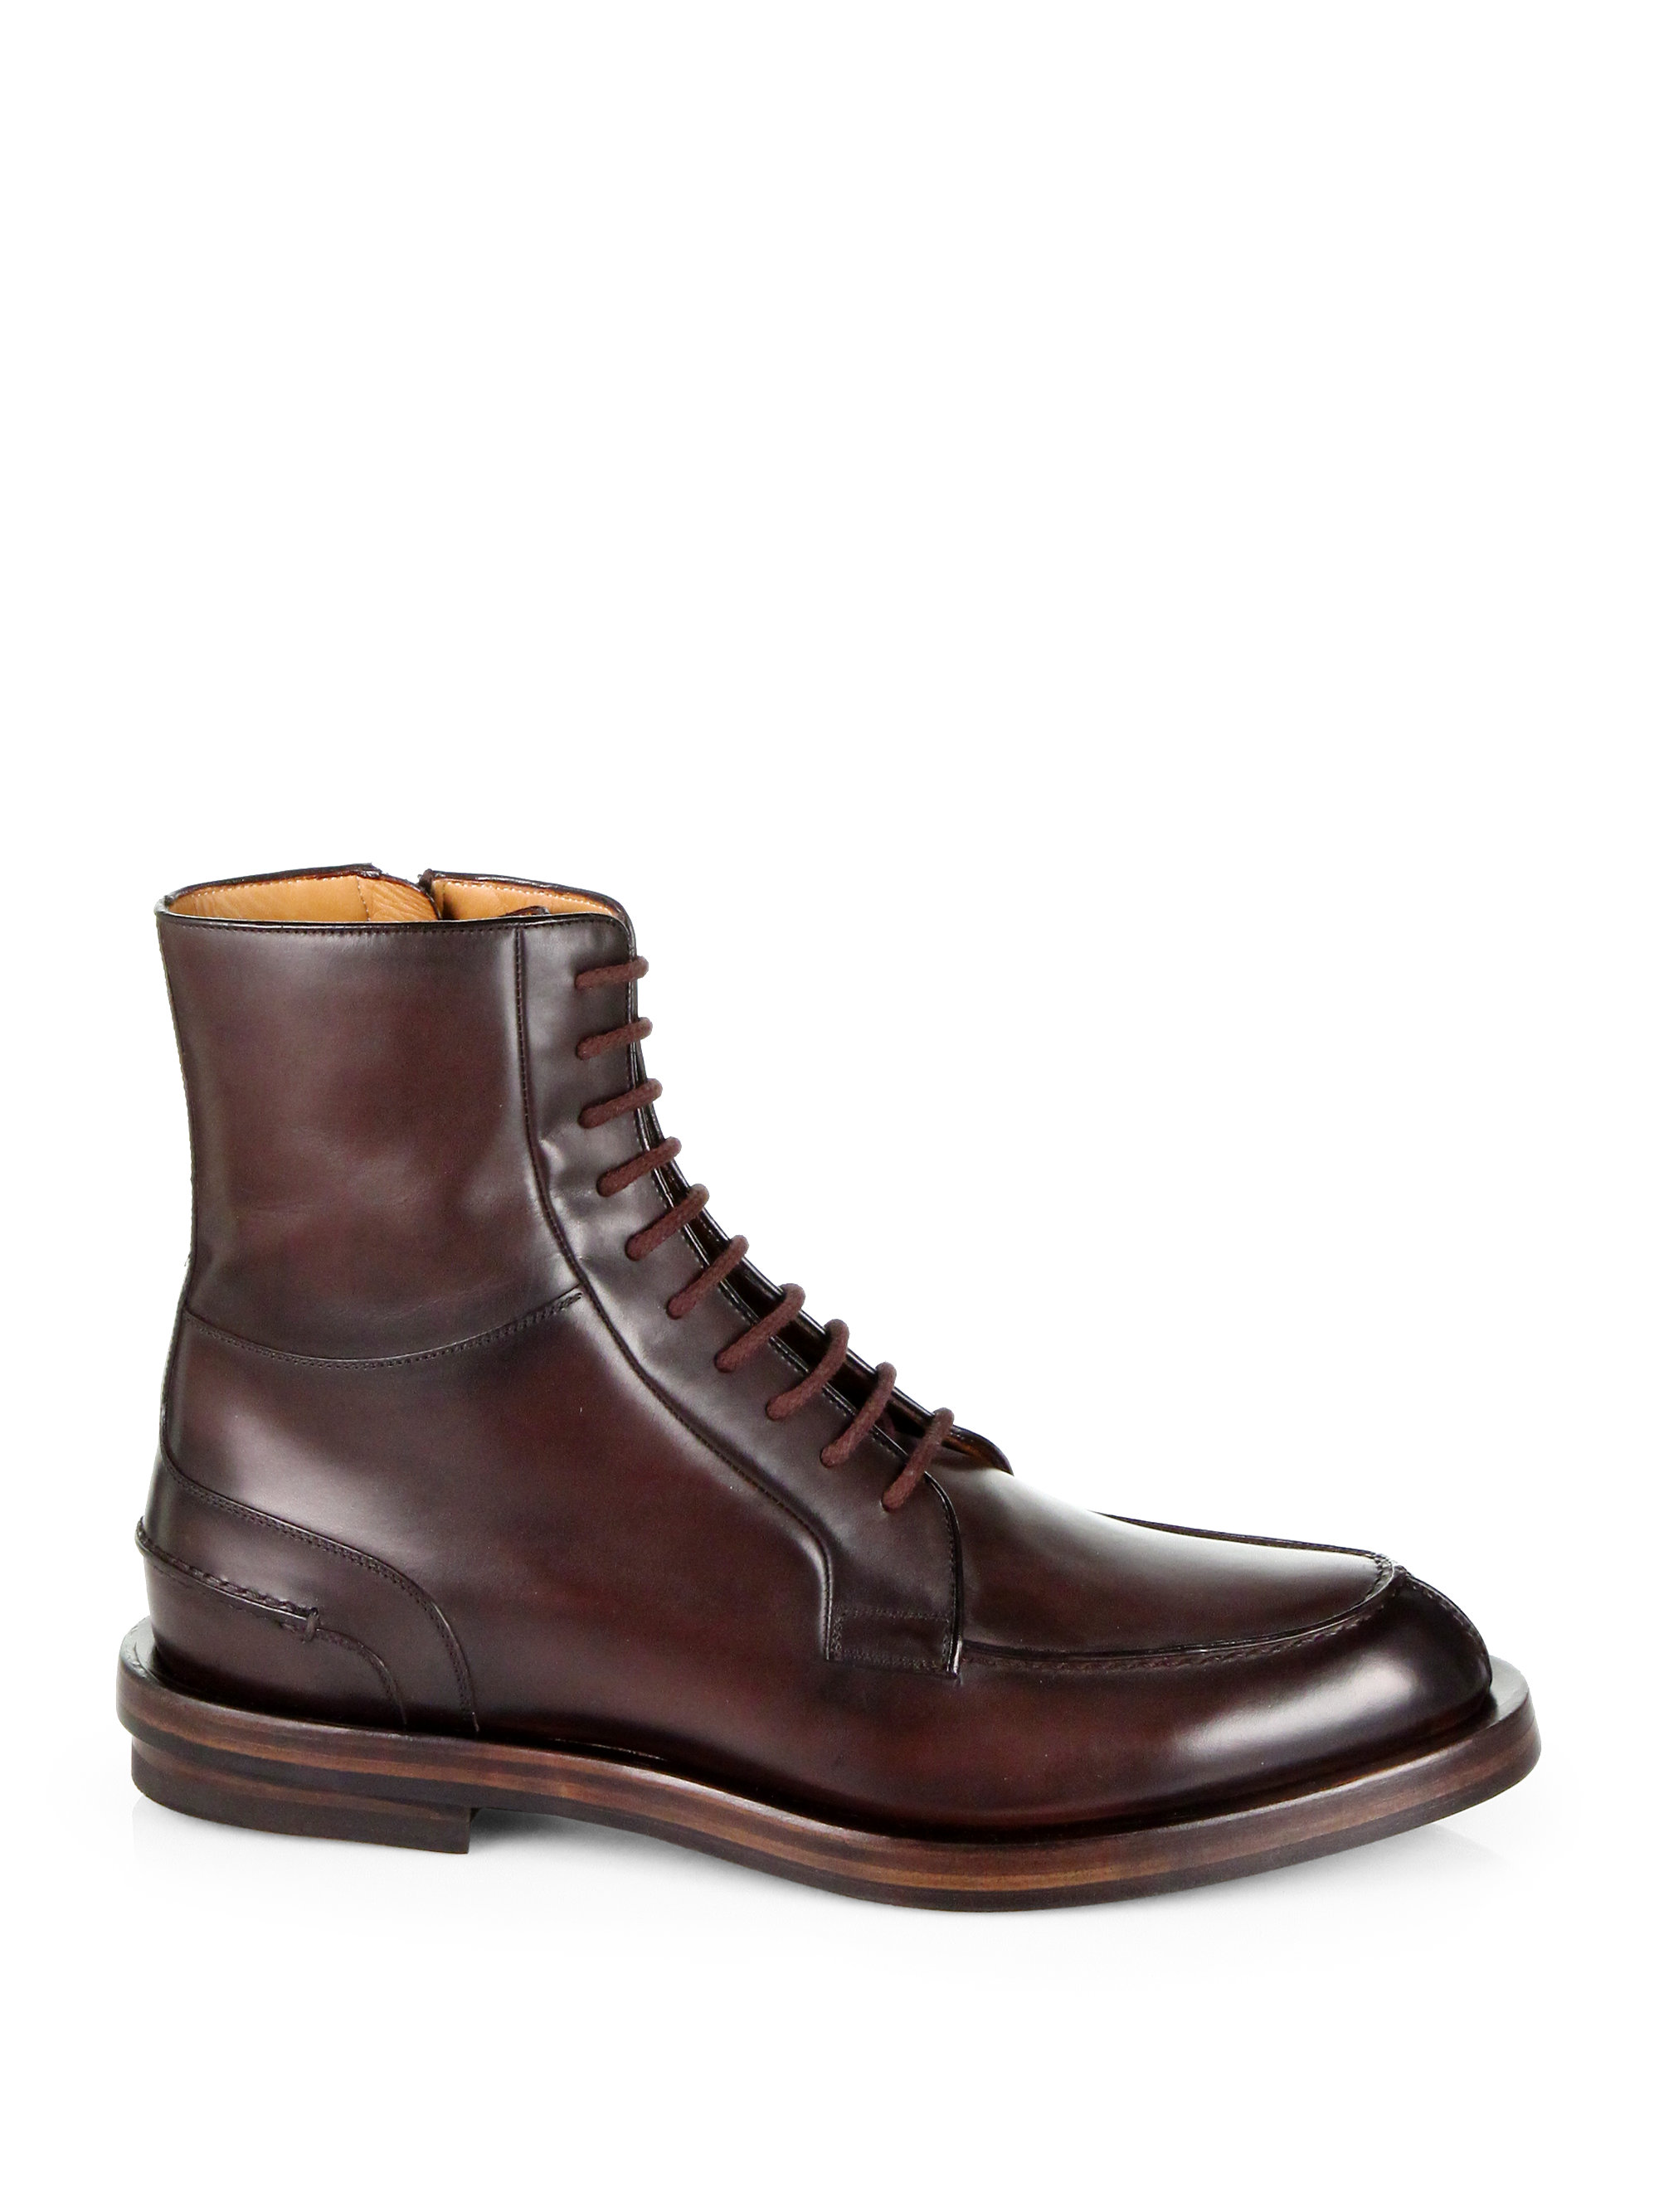 Gucci Leather Laceup Military Boots in Cocoa (Brown) for Men - Lyst